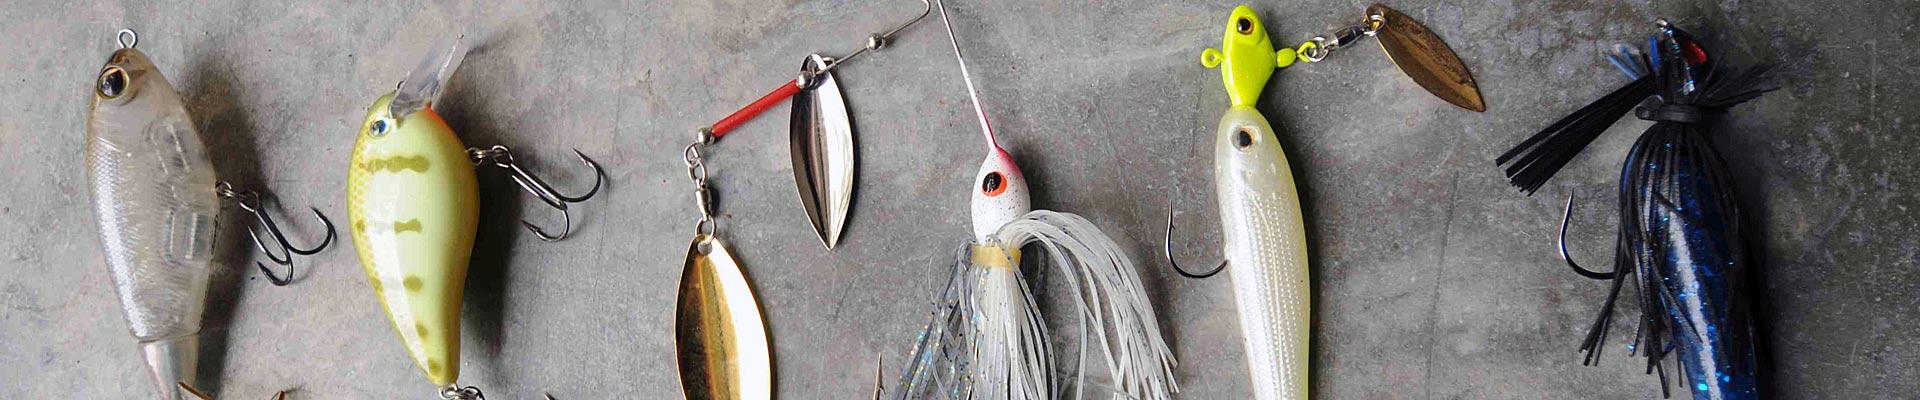 Five Fall Favorite Lures For Bass  The Ultimate Bass Fishing Resource  Guide® LLC